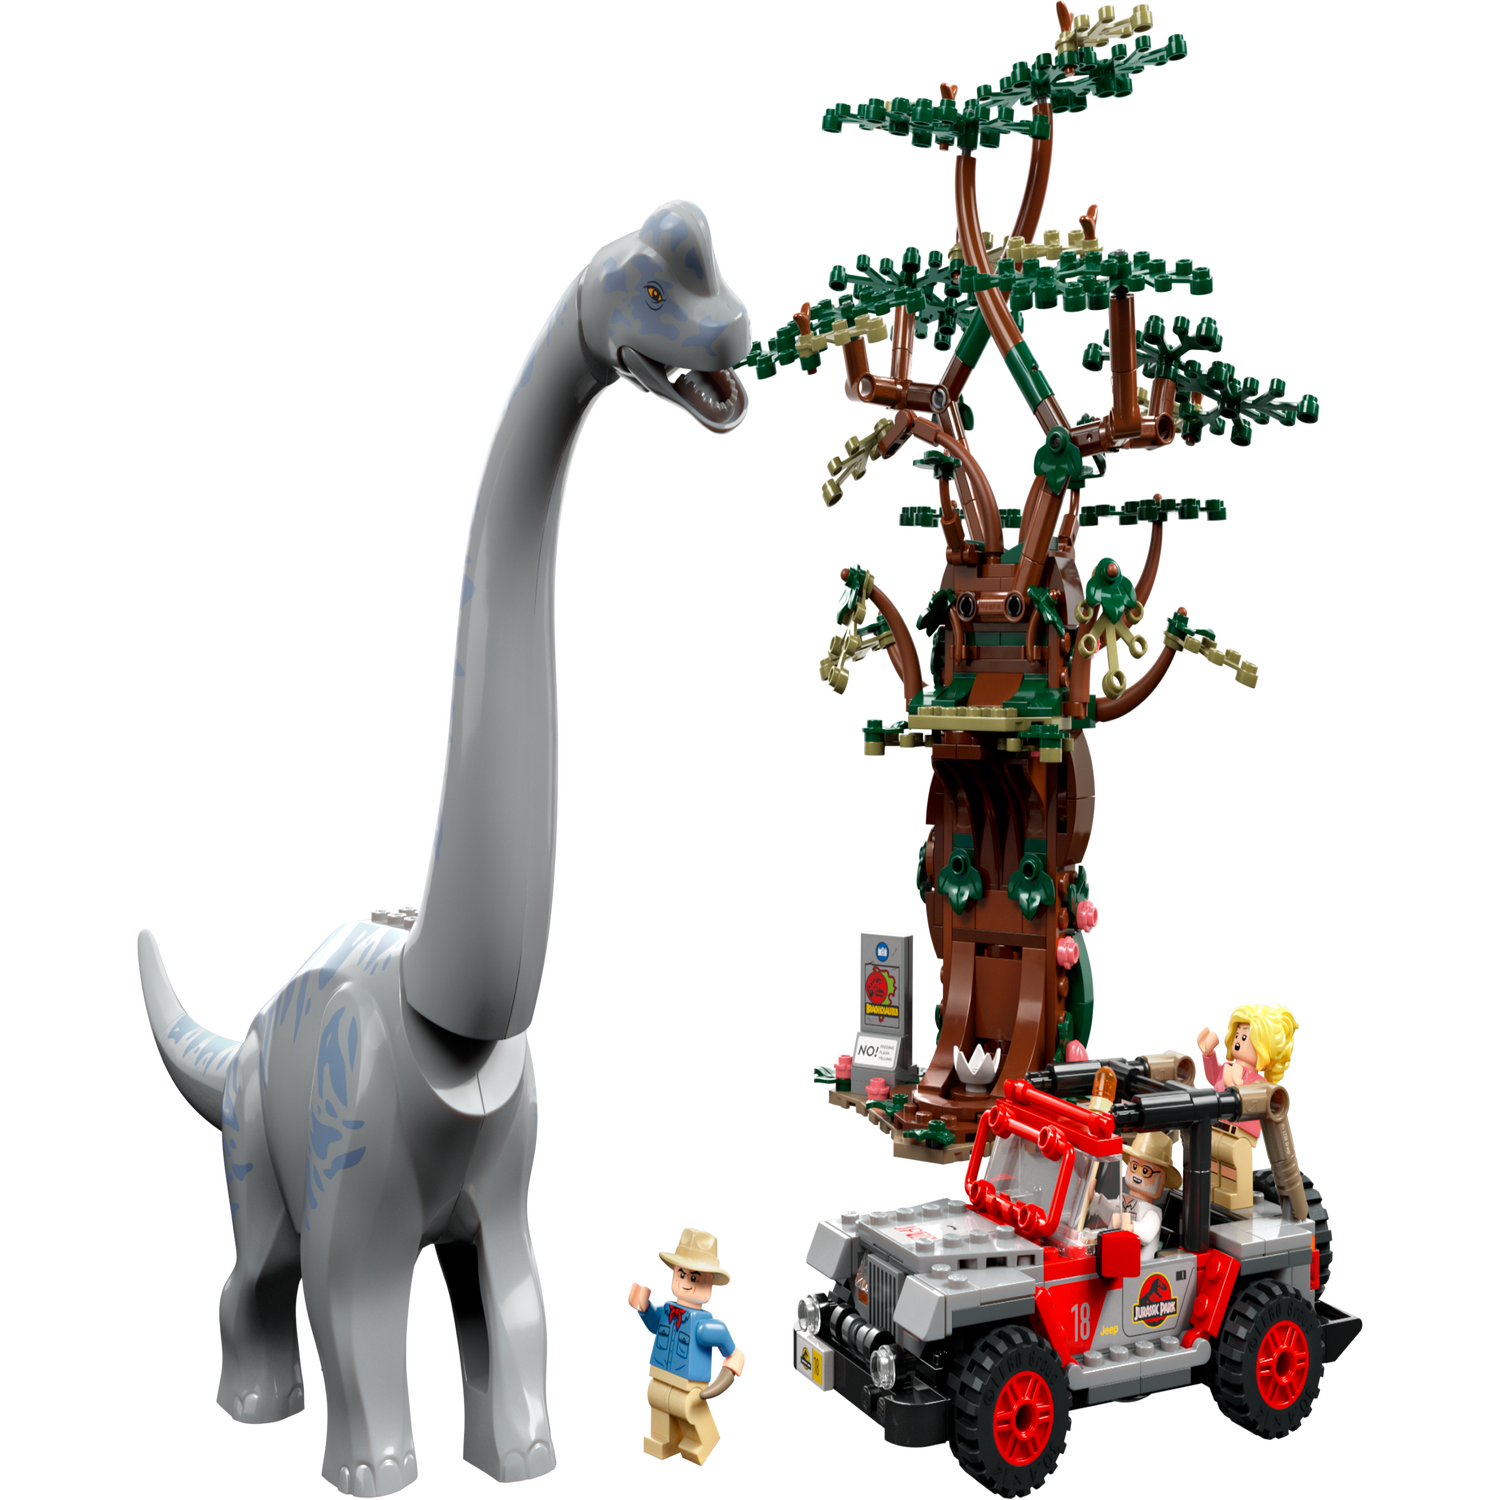 Brachiosaurus Discovery 76960 | Jurassic | online at the Official Shop US